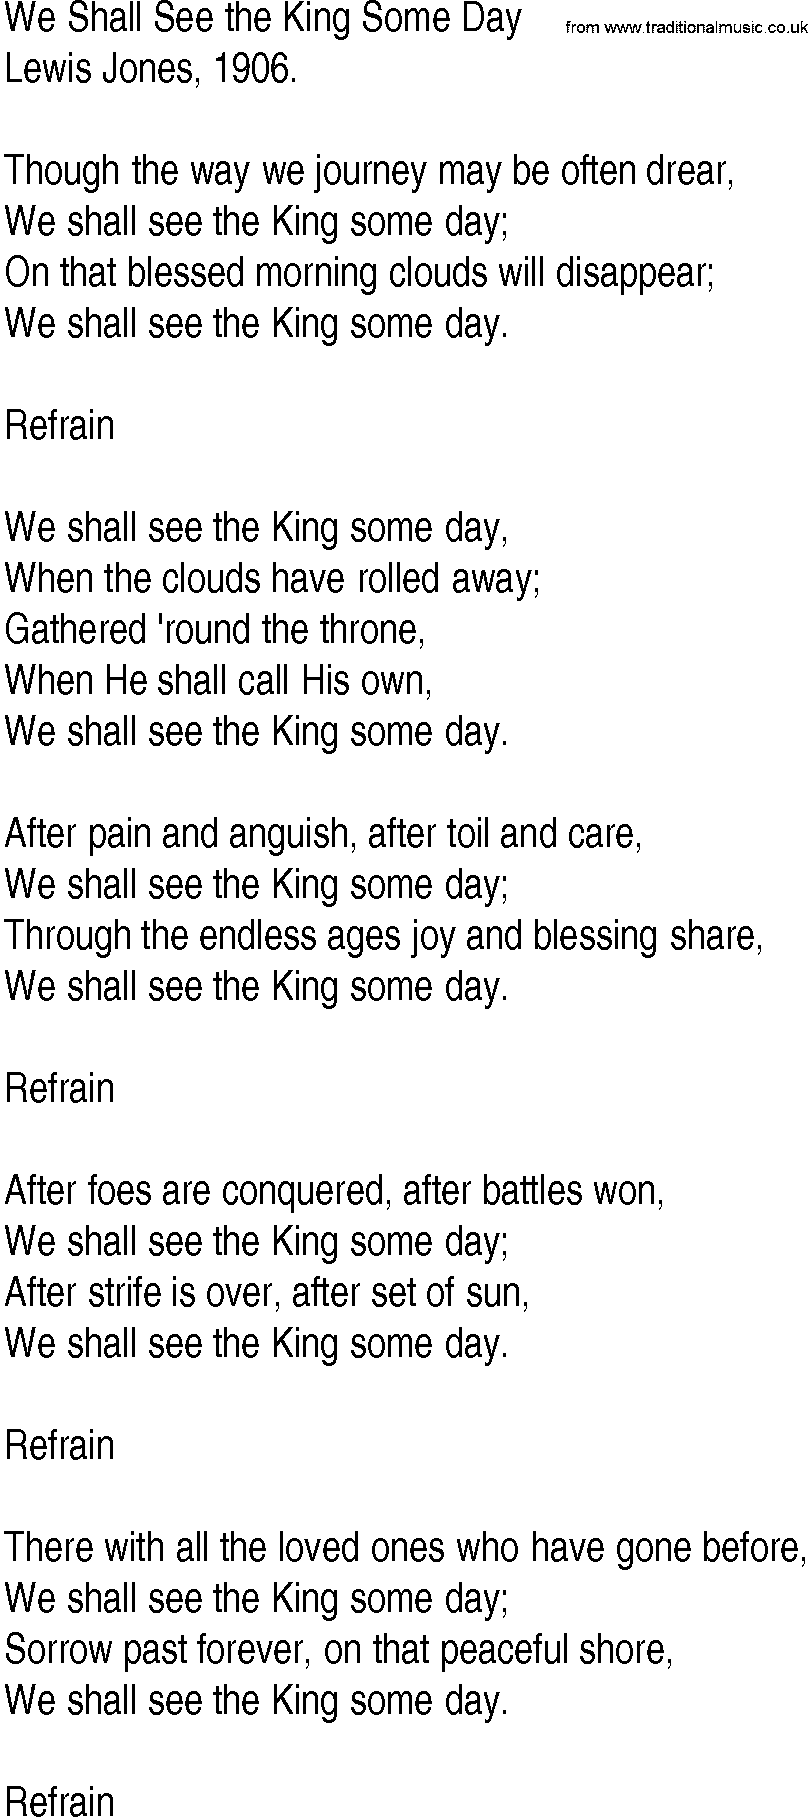 Hymn and Gospel Song: We Shall See the King Some Day by Lewis Jones lyrics